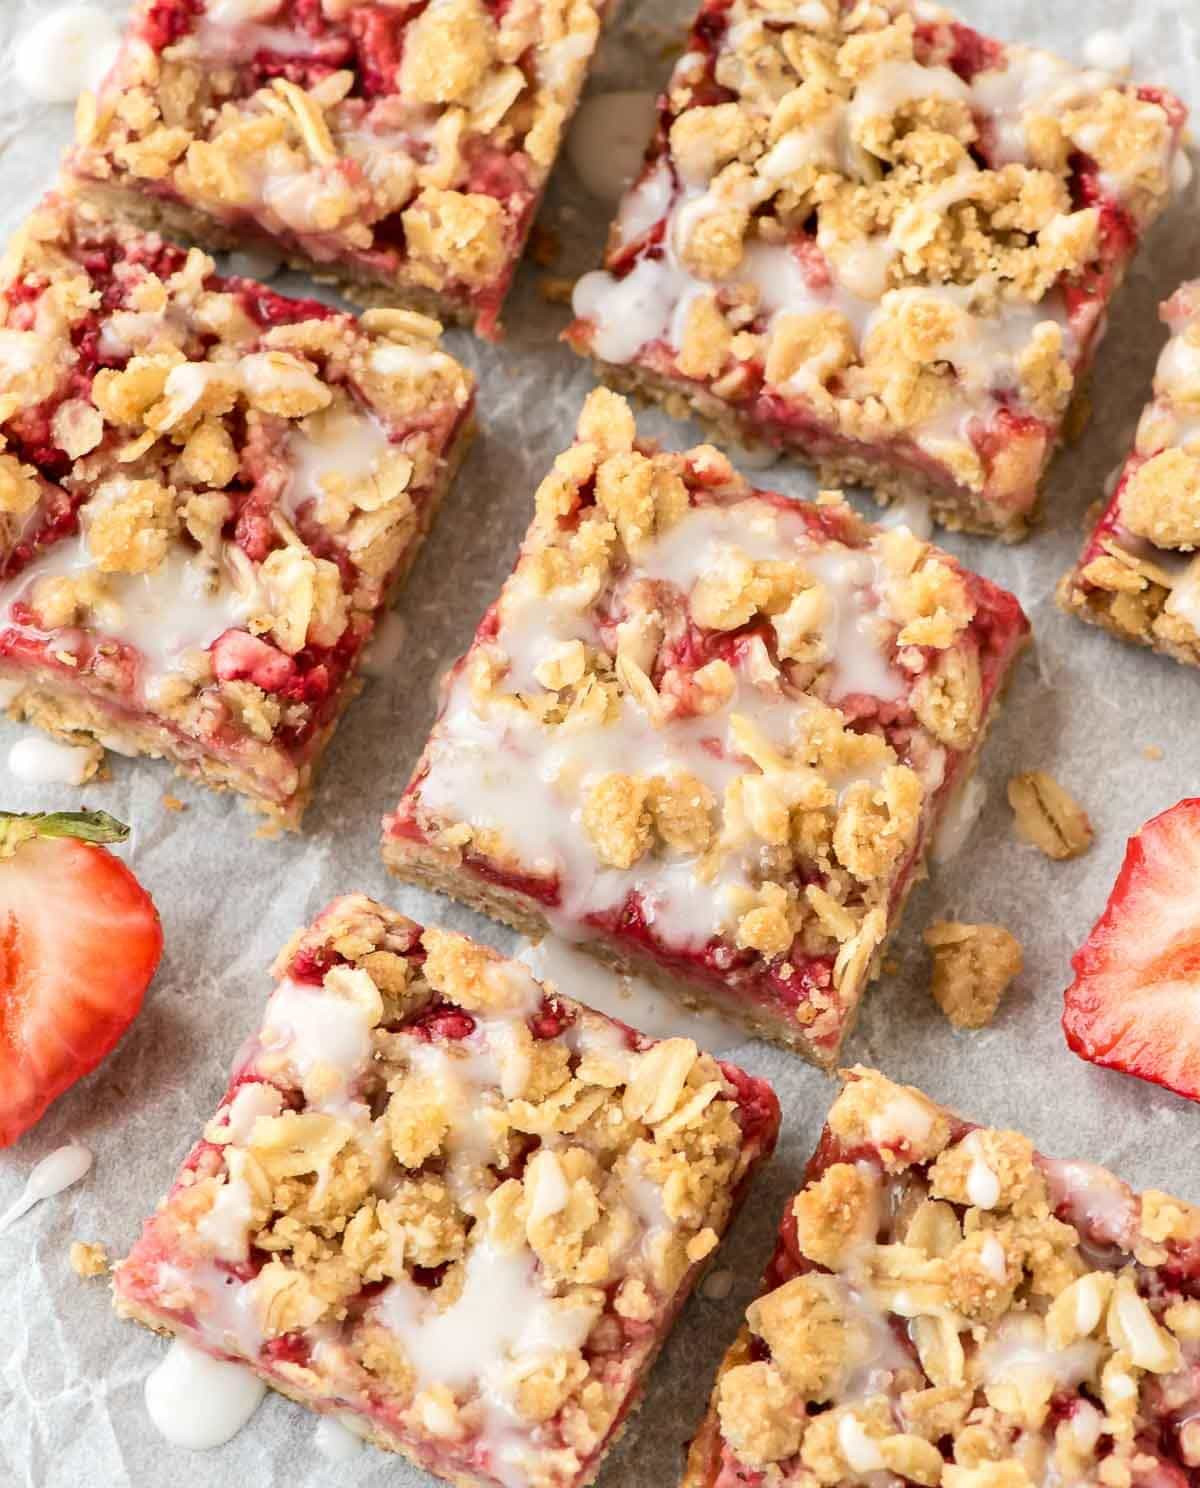 Healthy Baked Desserts Recipes
 Healthy Strawberry Oatmeal Bars Recipe